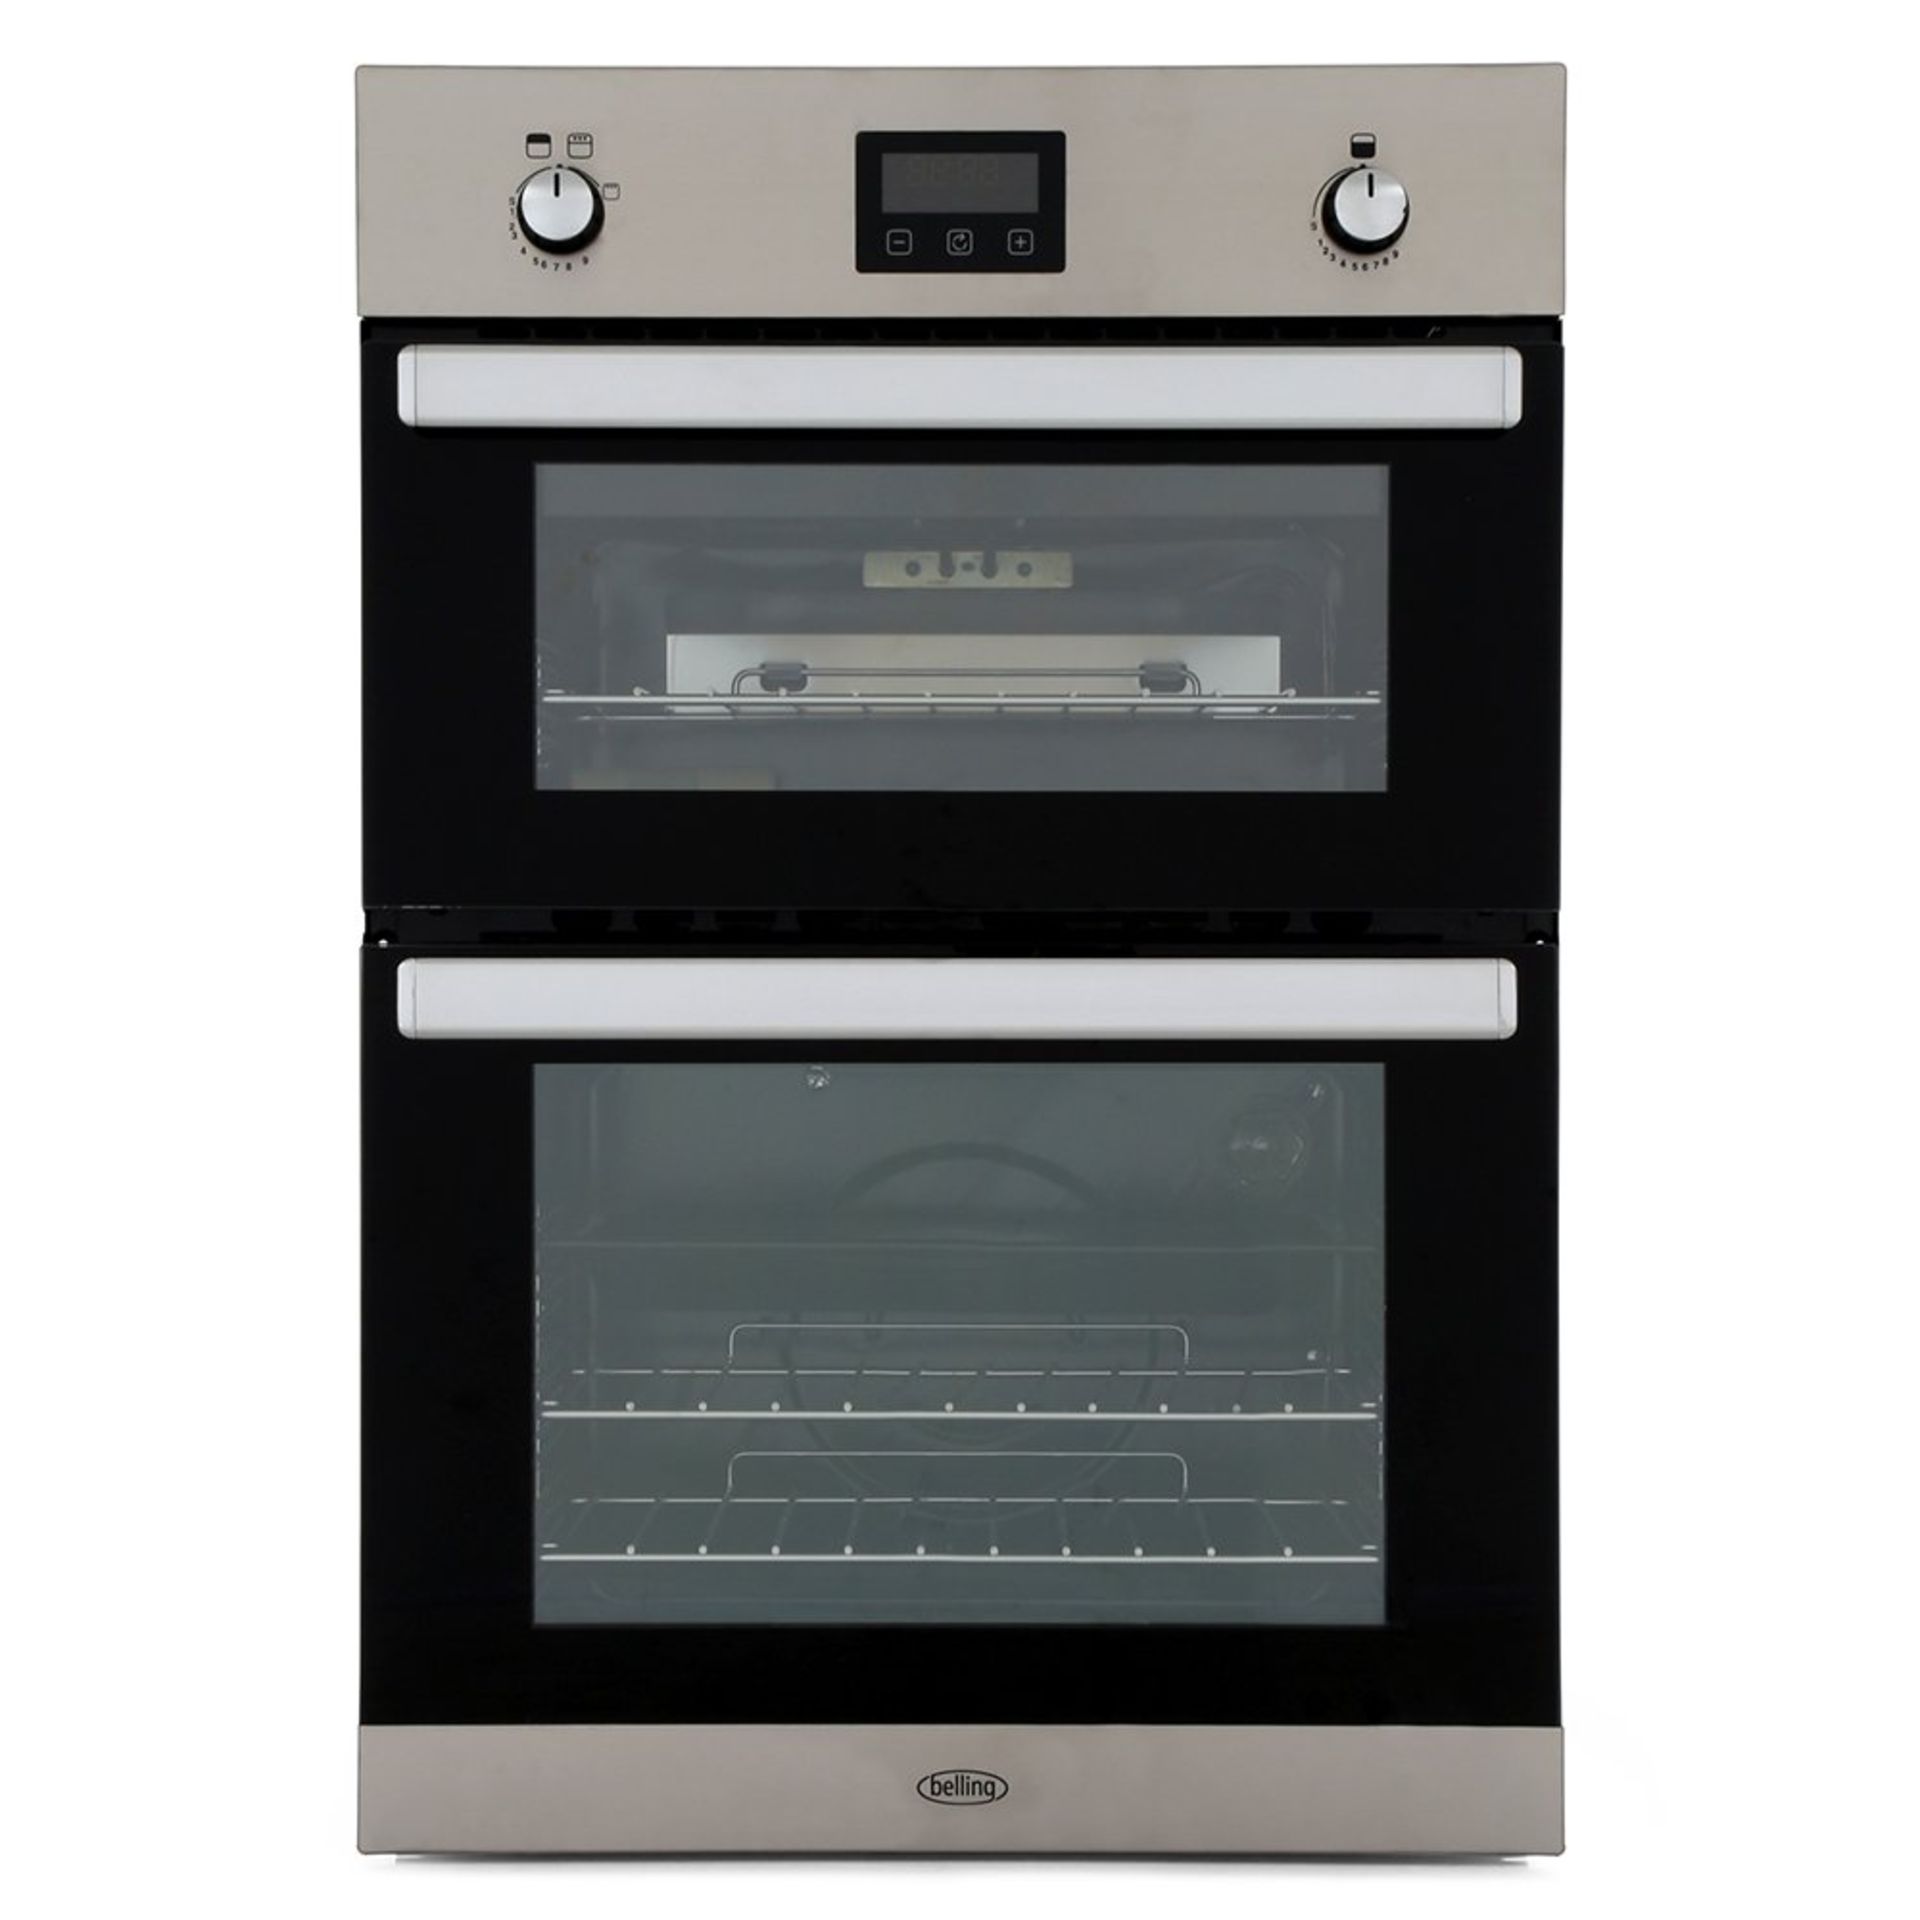 Grade B Belling BI902G Built-In Gas Oven, A/A Energy Rating, Stainless Steel in Black